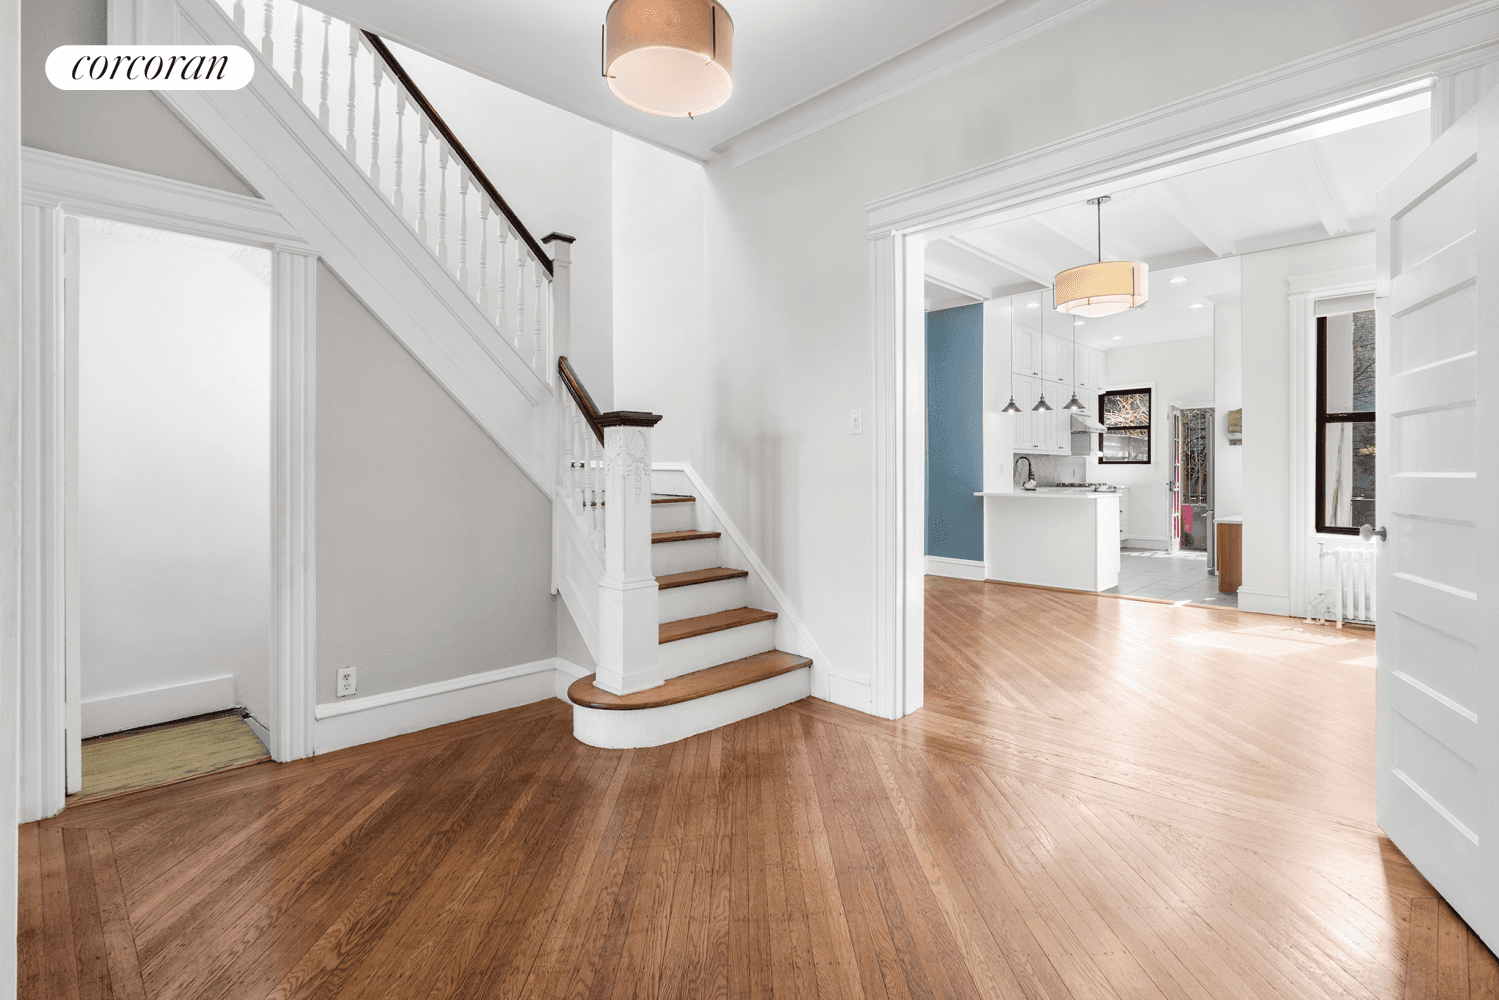 Welcome to 264 78th Street, a gorgeous limestone townhouse in prime Bay Ridge.